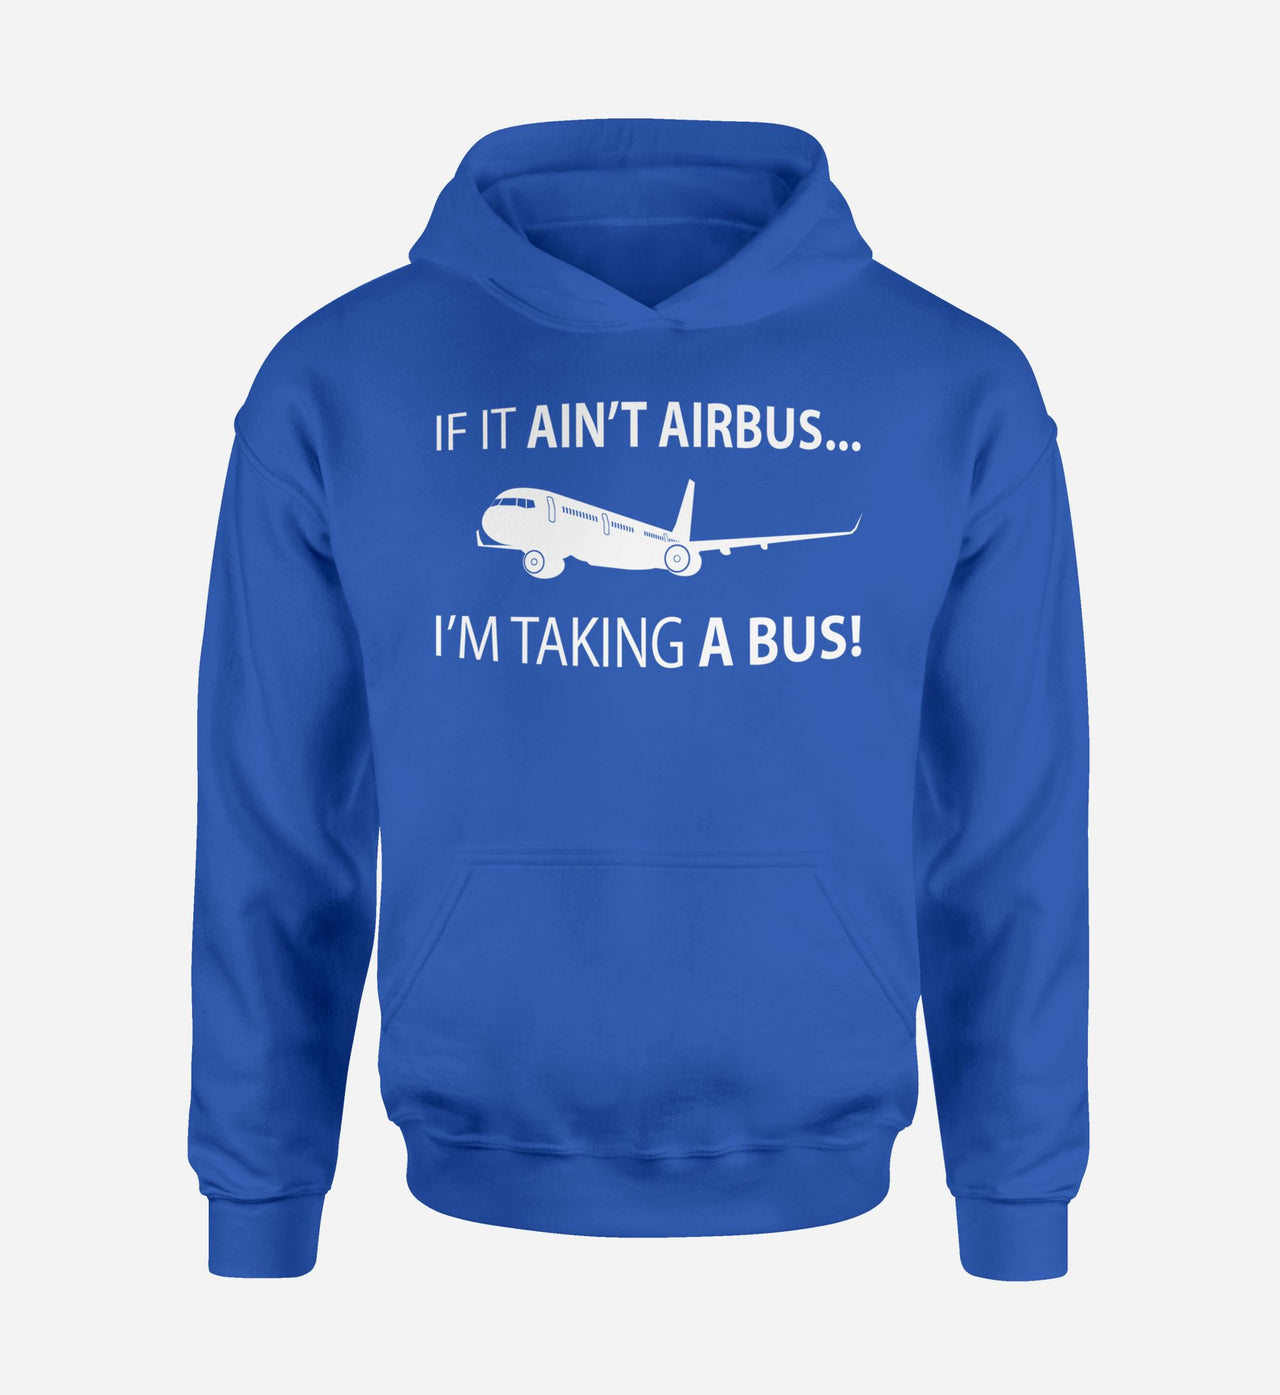 If It Ain't Airbus I'm Taking A Bus Designed Hoodies